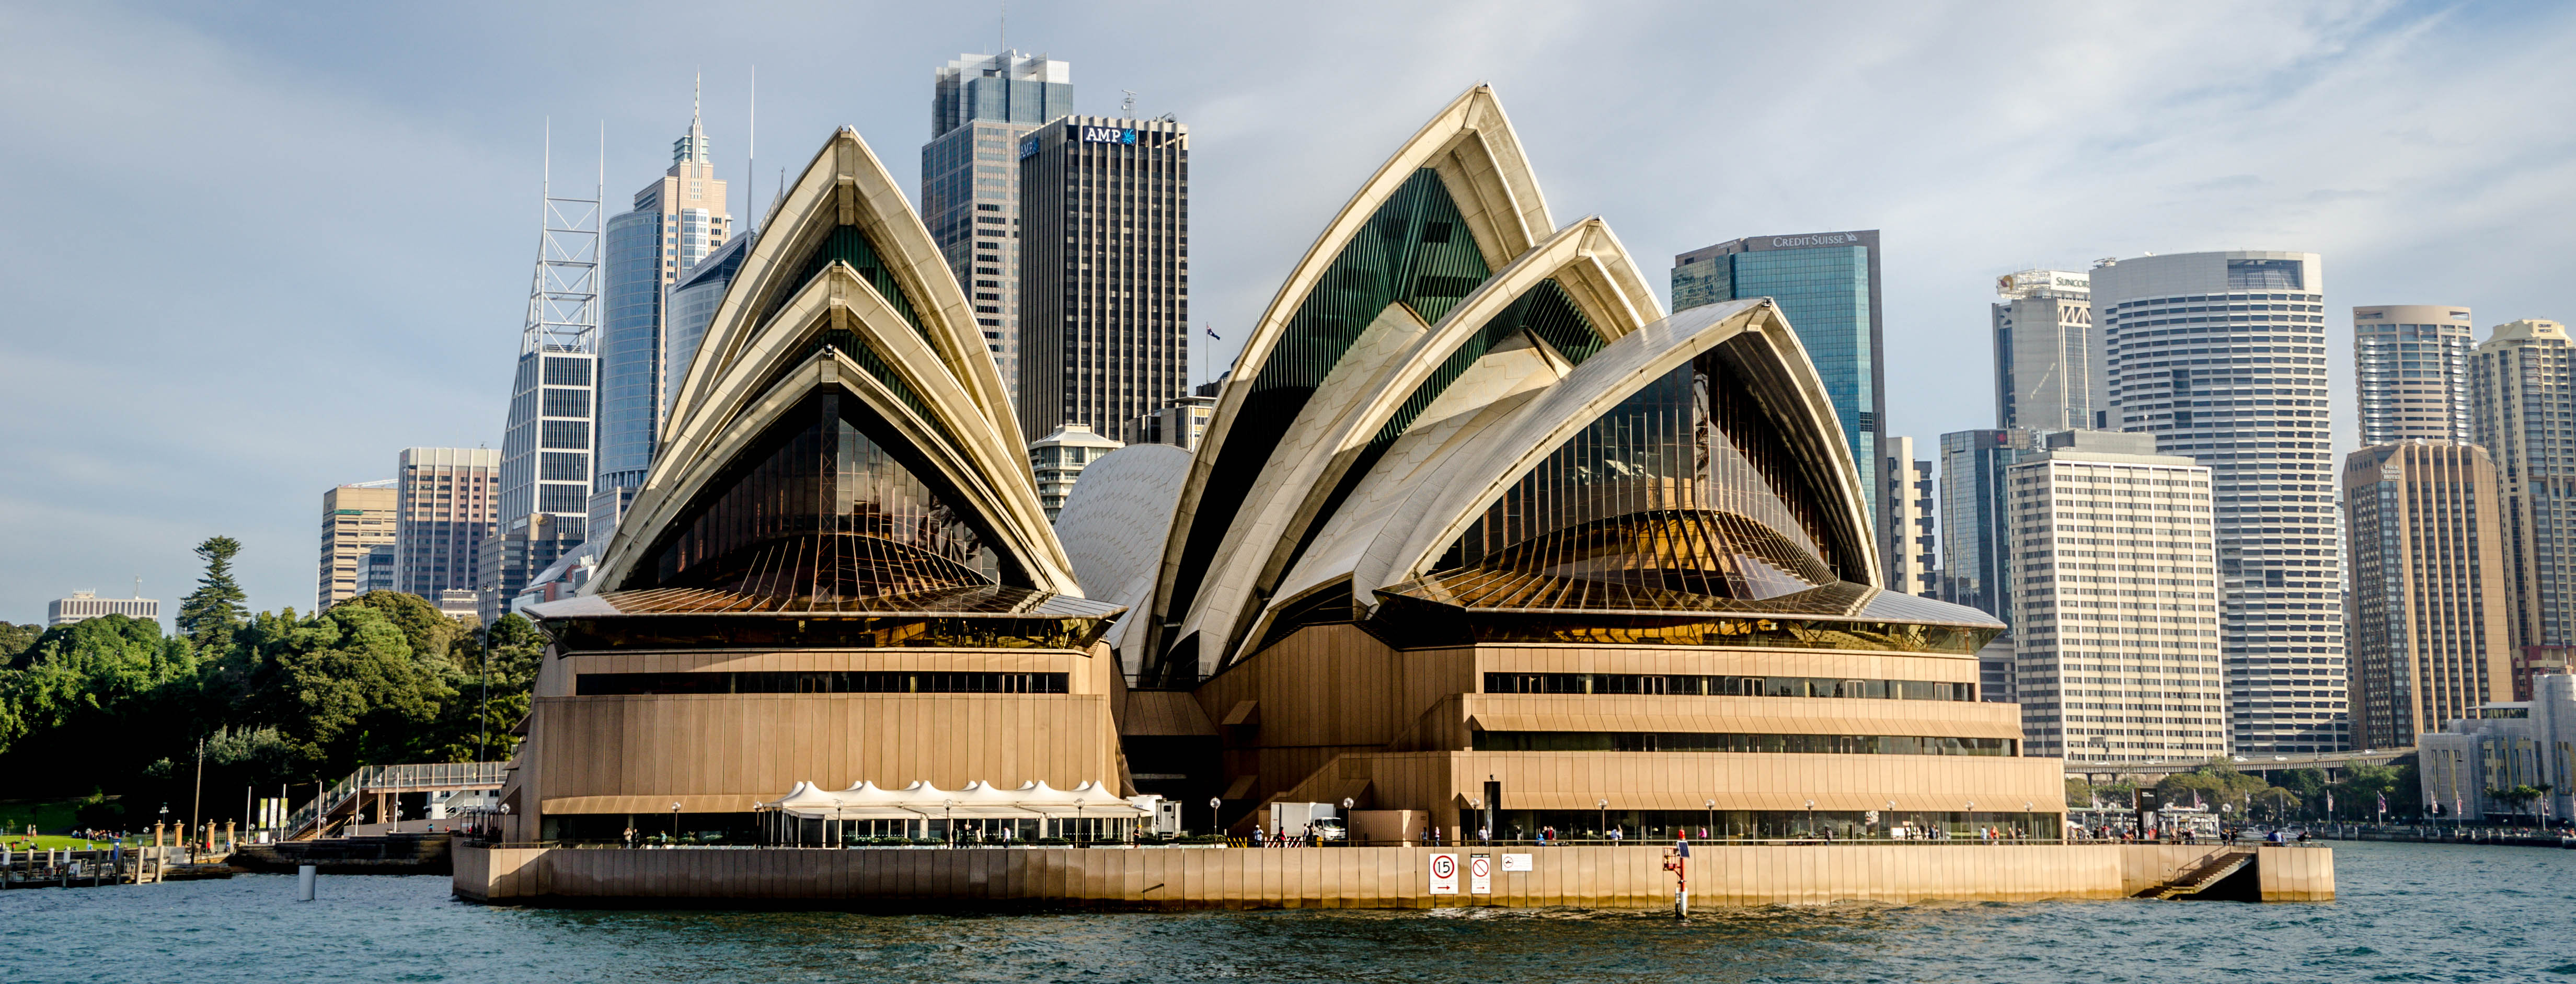 HQ Opera House Wallpapers | File 1144.88Kb